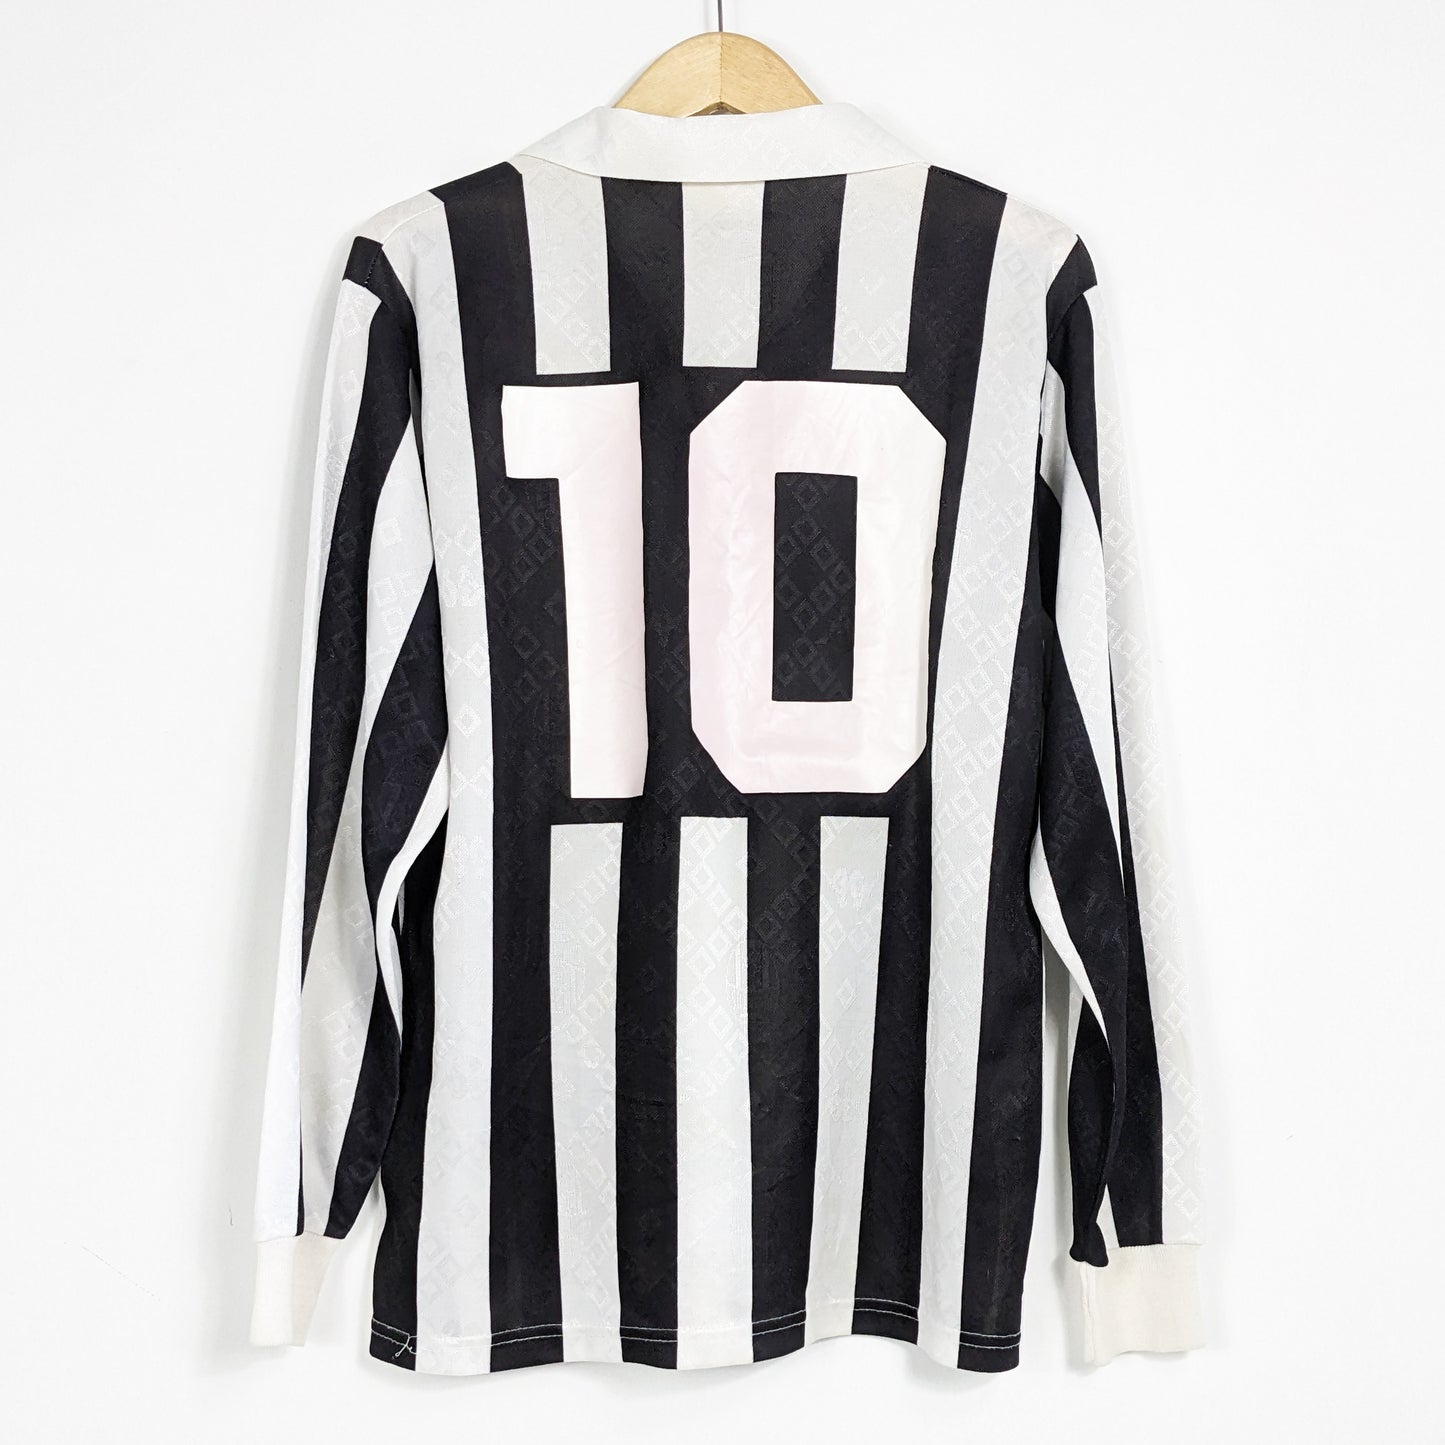 Authentic Juventus 1989/1990 Home - #10 Size L (Long sleeve)